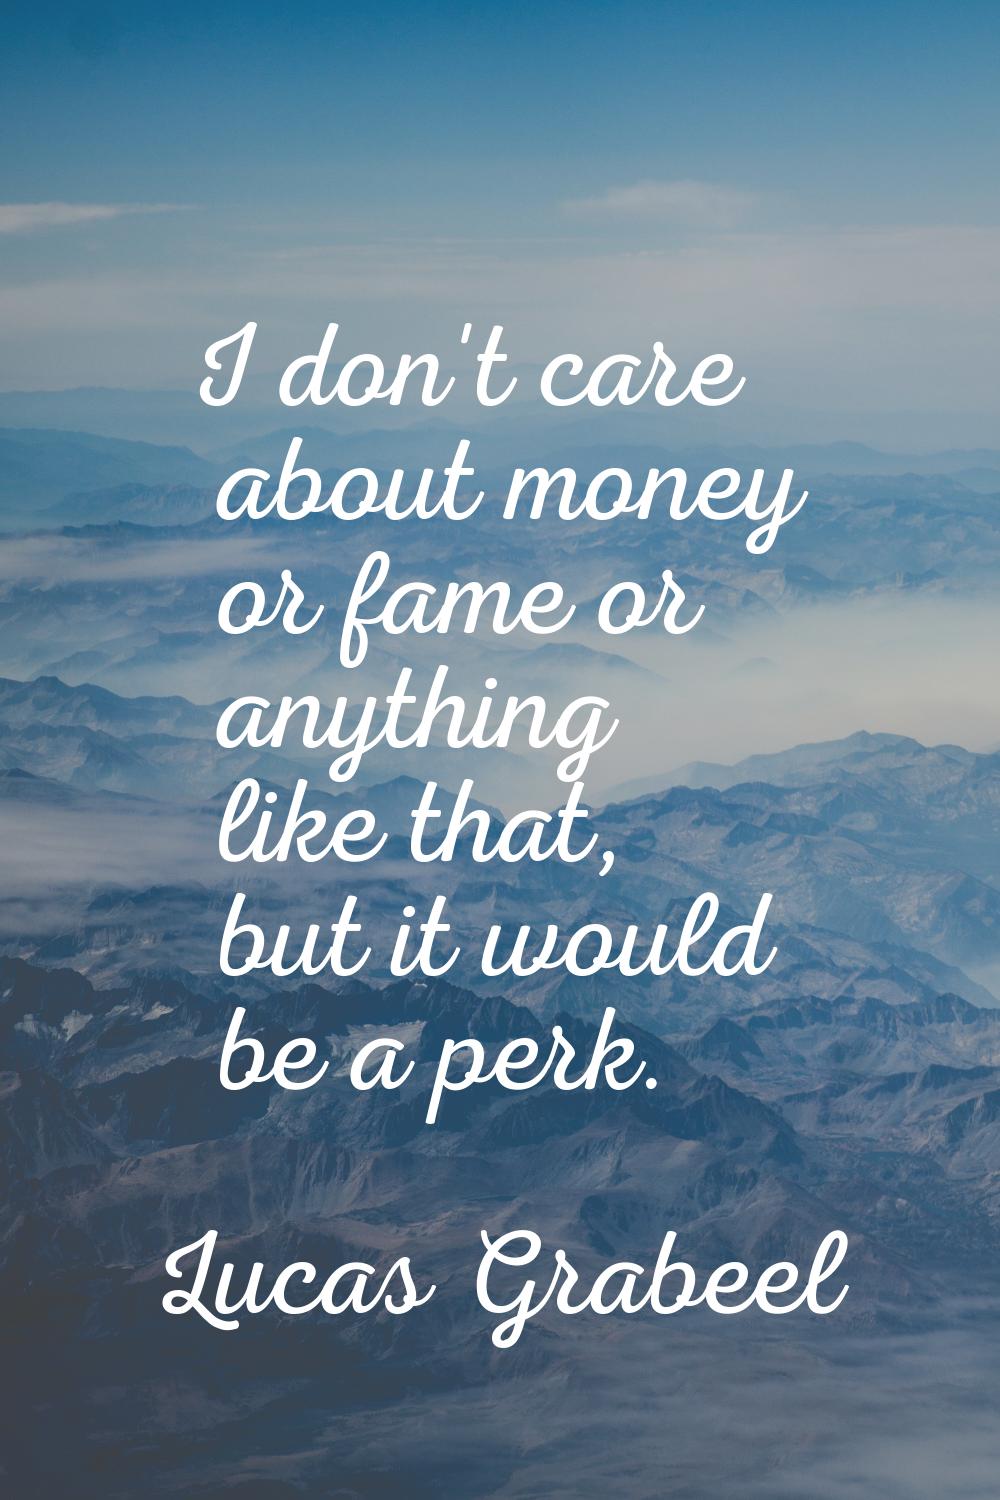 I don't care about money or fame or anything like that, but it would be a perk.